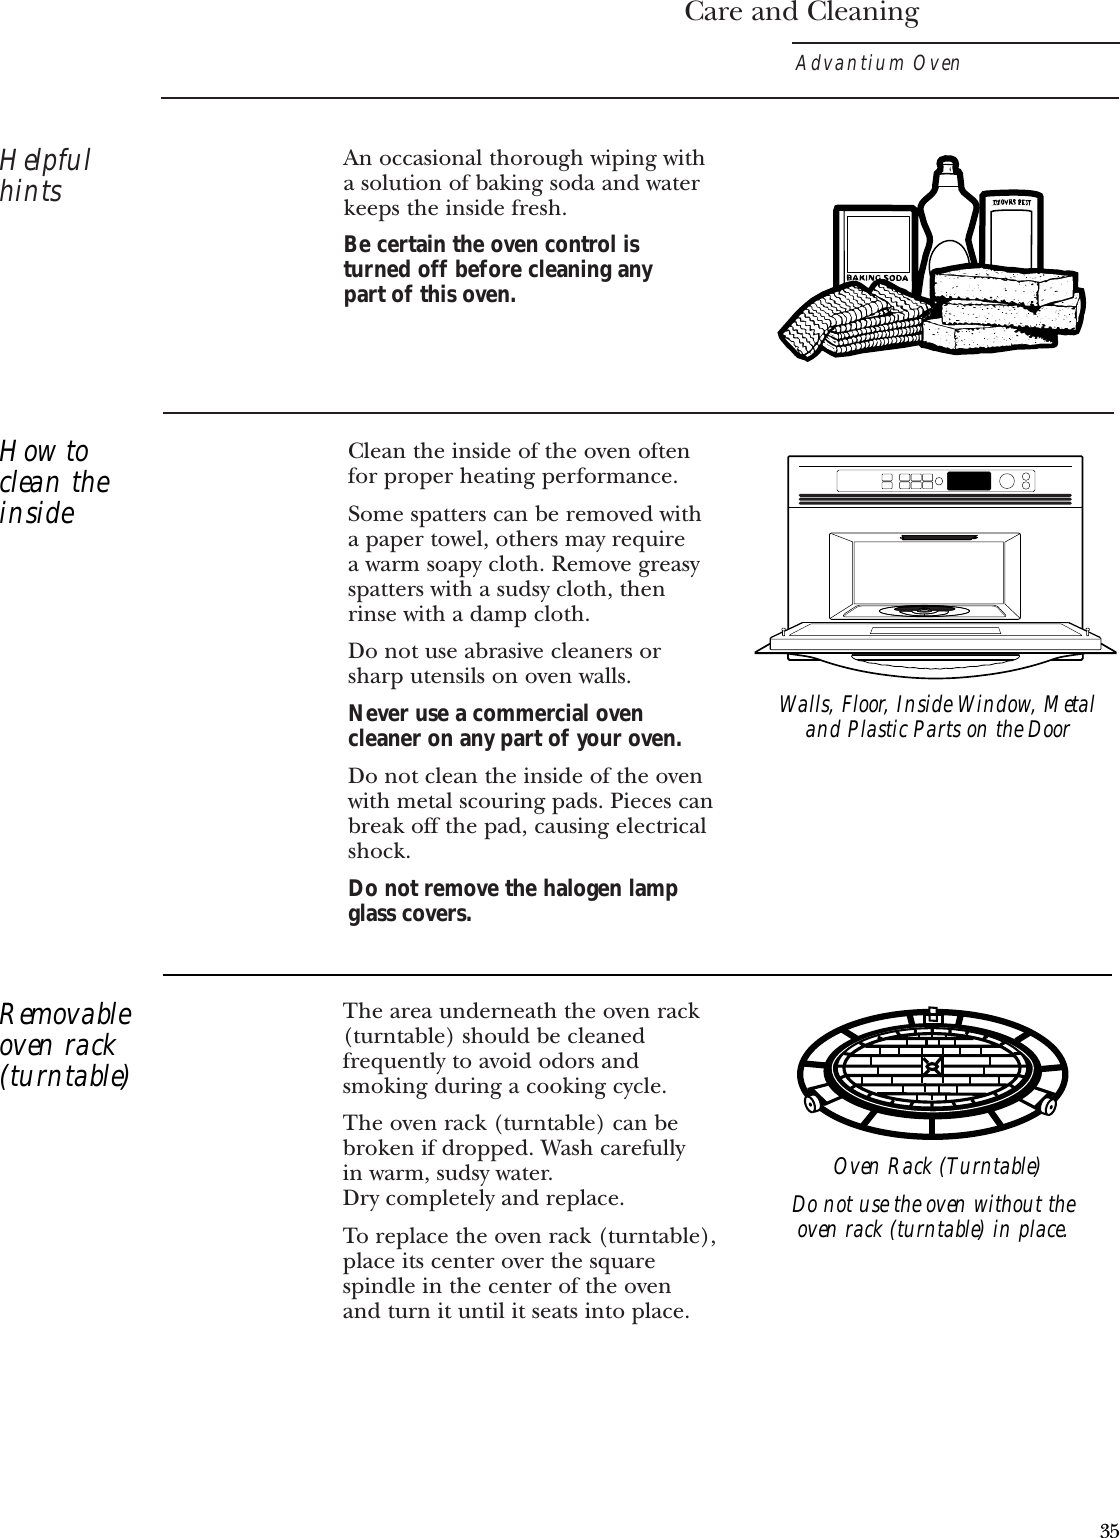 The area underneath the oven rack(turntable) should be cleanedfrequently to avoid odors andsmoking during a cooking cycle. The oven rack (turntable) can bebroken if dropped. Wash carefully in warm, sudsy water. Dry completely and replace. To replace the oven rack (turntable),place its center over the squarespindle in the center of the oven and turn it until it seats into place.Care and CleaningAdvantium OvenHelpfulhintsClean the inside of the oven oftenfor proper heating performance.Some spatters can be removed with a paper towel, others may require a warm soapy cloth. Remove greasyspatters with a sudsy cloth, then rinse with a damp cloth.Do not use abrasive cleaners orsharp utensils on oven walls. Never use a commercial ovencleaner on any part of your oven.Do not clean the inside of the ovenwith metal scouring pads. Pieces canbreak off the pad, causing electricalshock.Do not remove the halogen lampglass covers.An occasional thorough wiping witha solution of baking soda and waterkeeps the inside fresh. Be certain the oven control is turned off before cleaning any part of this oven.Walls, Floor, Inside Window, Metaland Plastic Parts on the DoorDo not use the oven without theoven rack (turntable) in place.How toclean theinsideRemovableoven rack(turntable)Oven Rack (Turntable)35